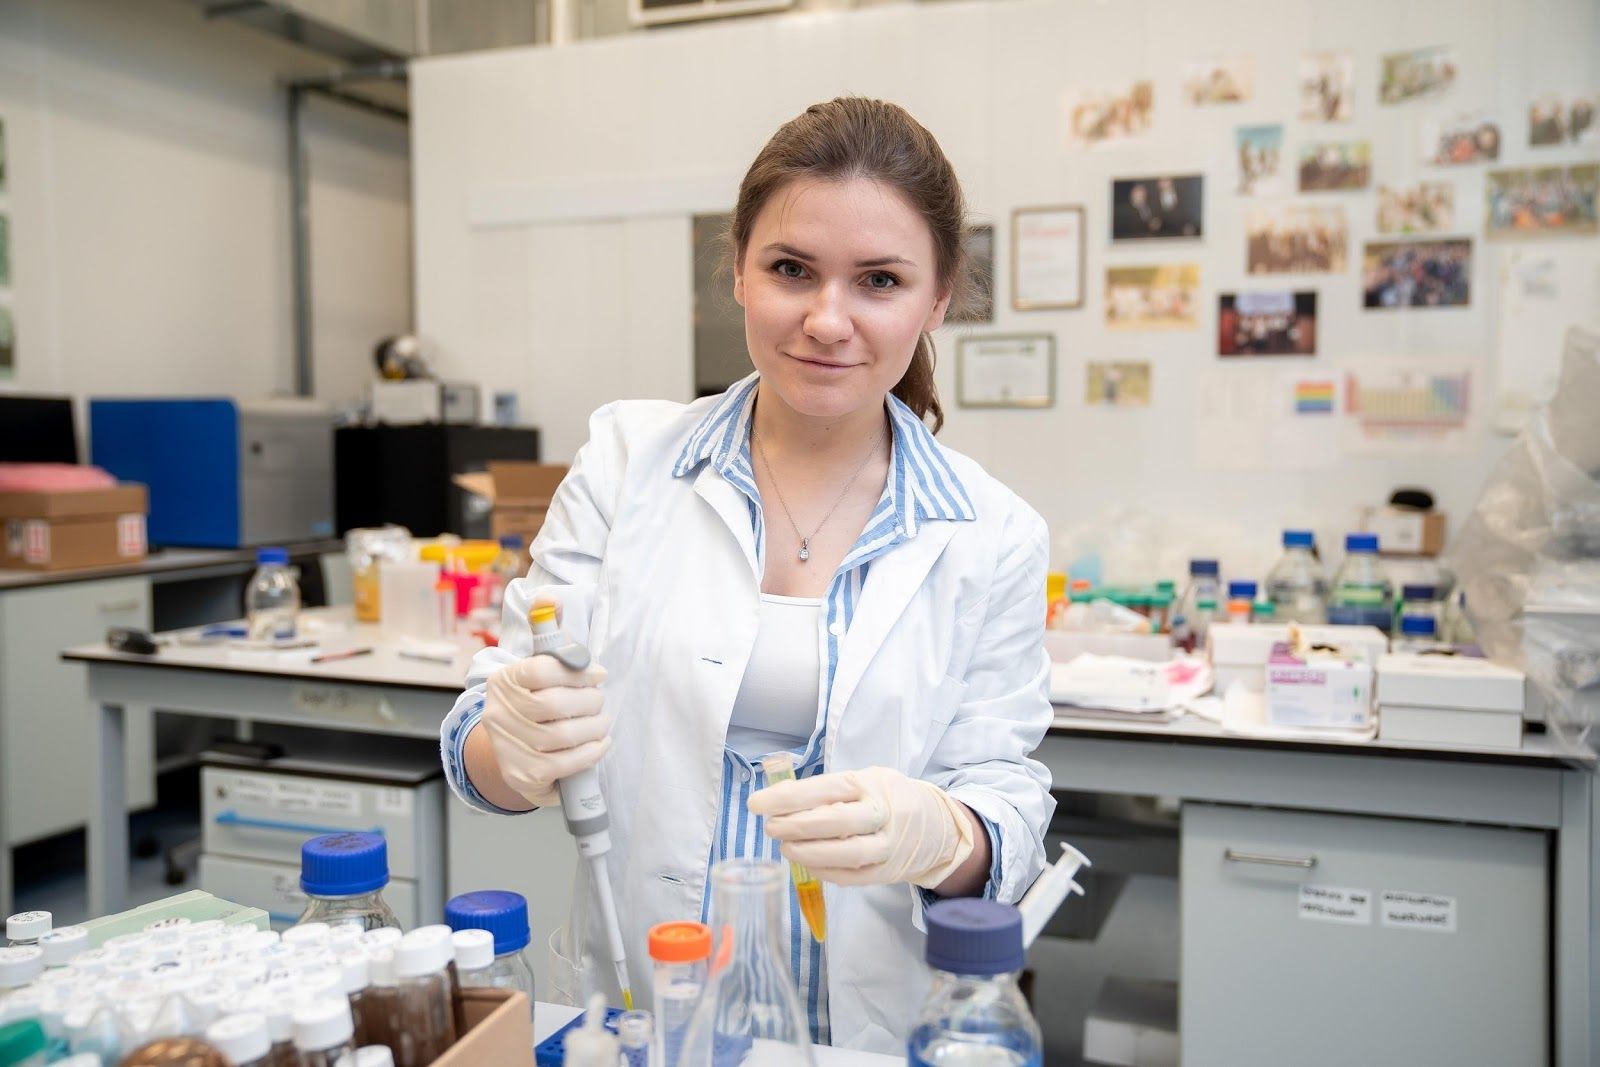 Photo. MIPT doctoral student Elizaveta Mochalova prepares samples to test the efficiency of cancer cell recognition by the team’s nanoagents. Credit: Evgeniy Pelevin/MIPT Press Office